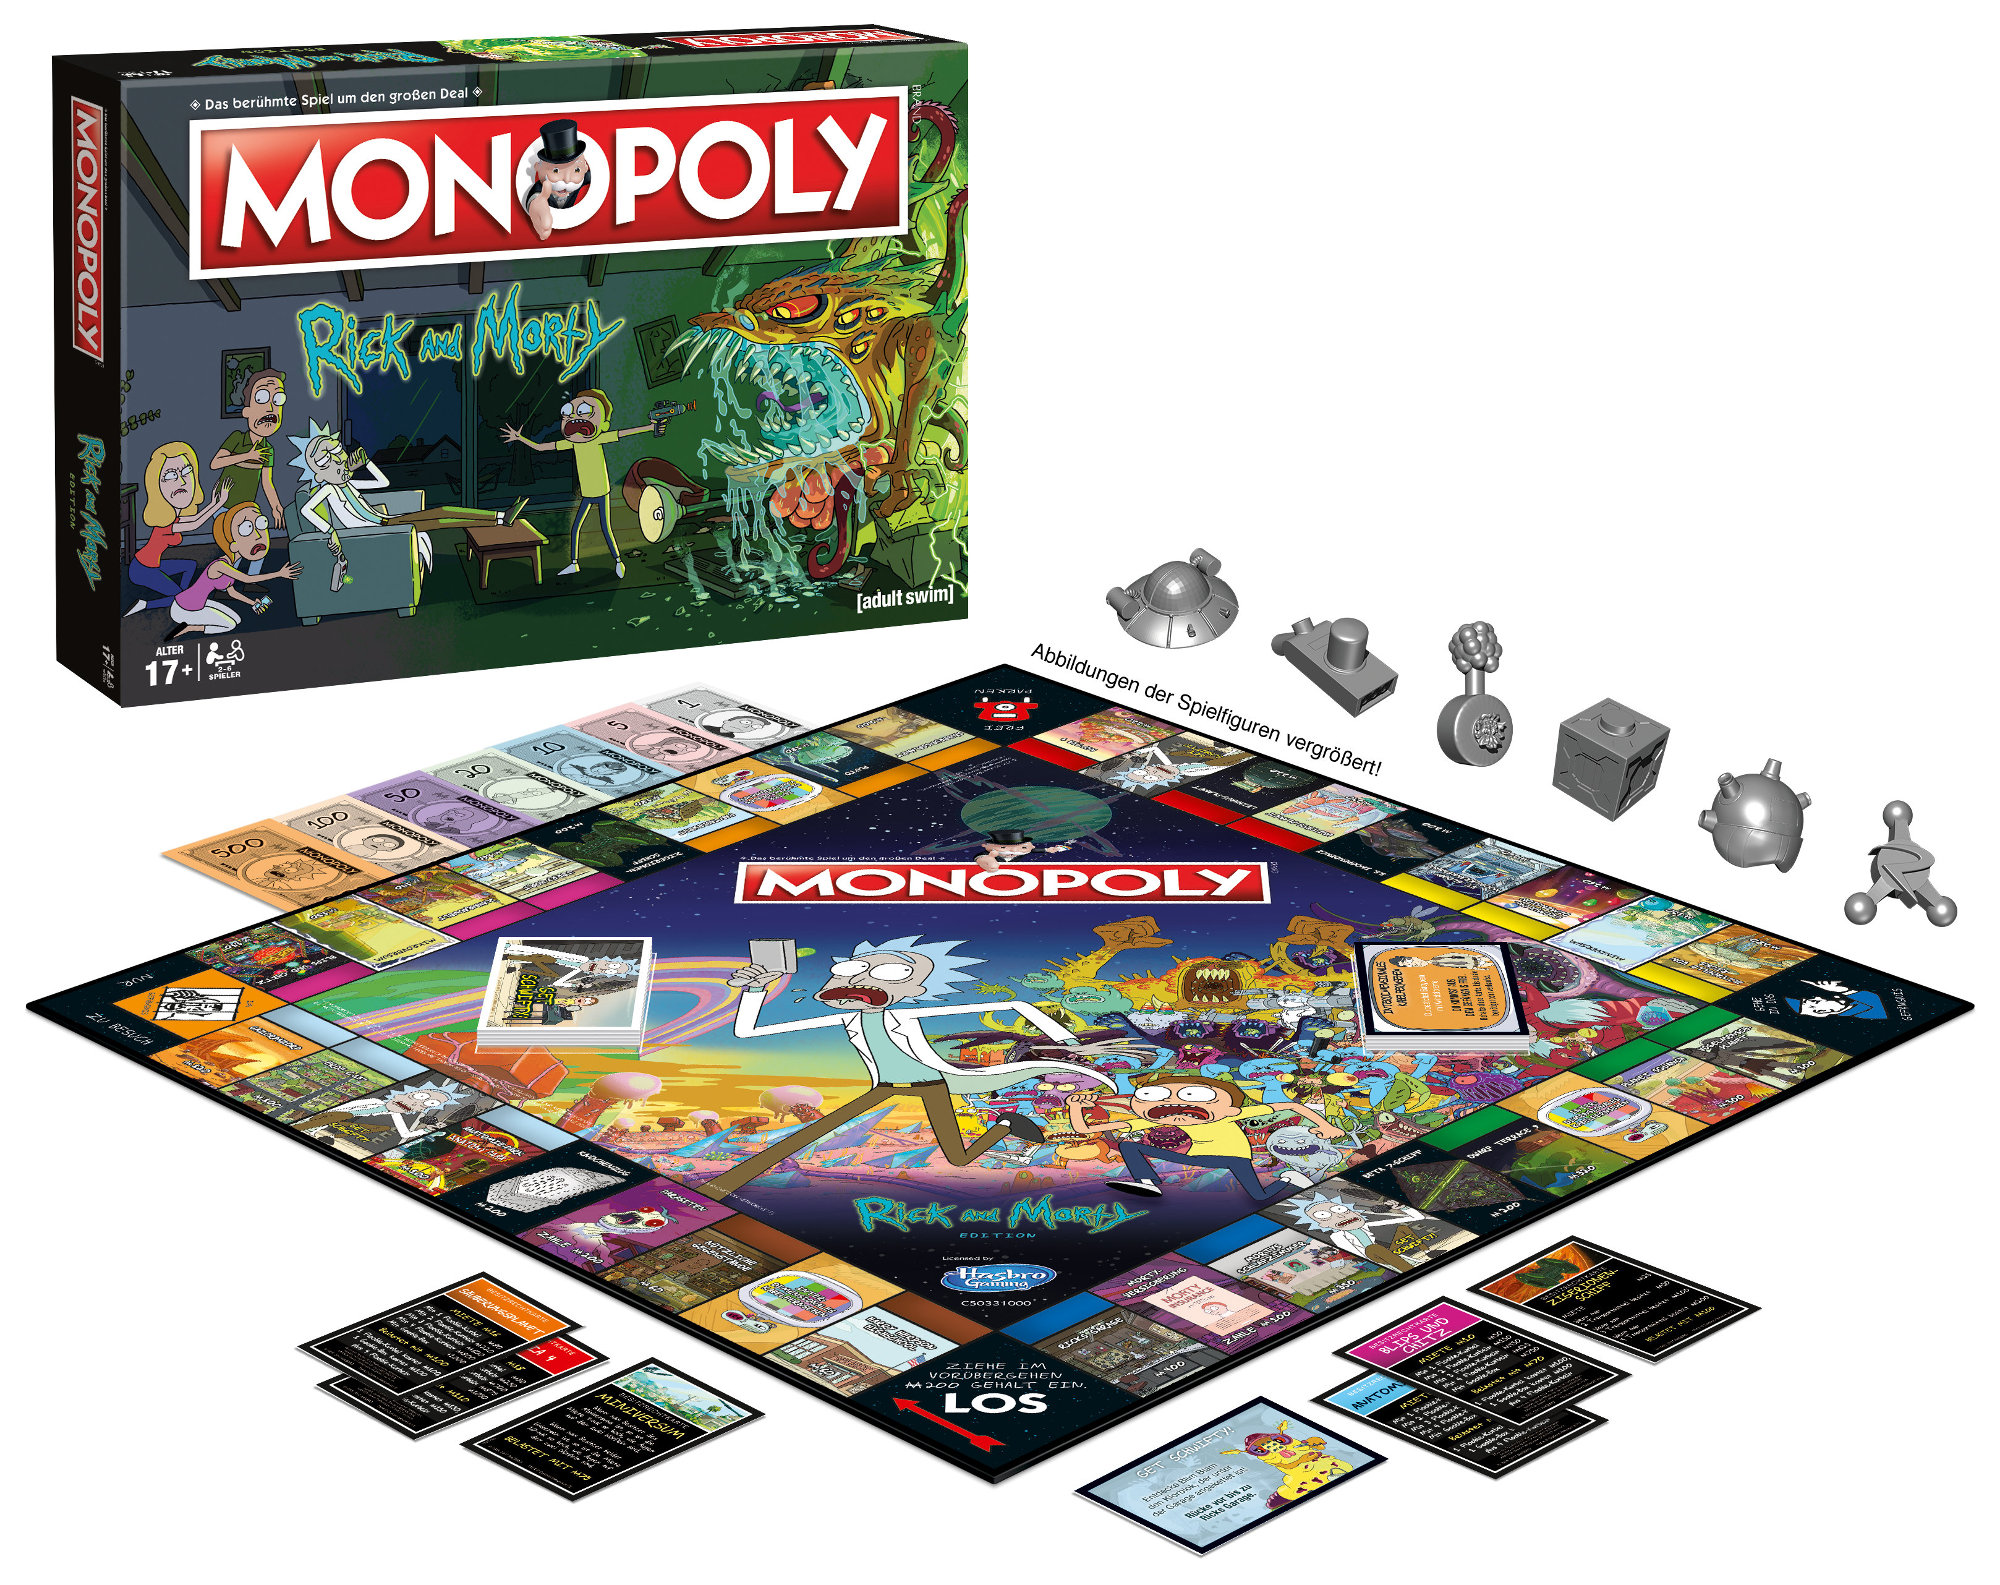 MONOPOLY Rick and Morty